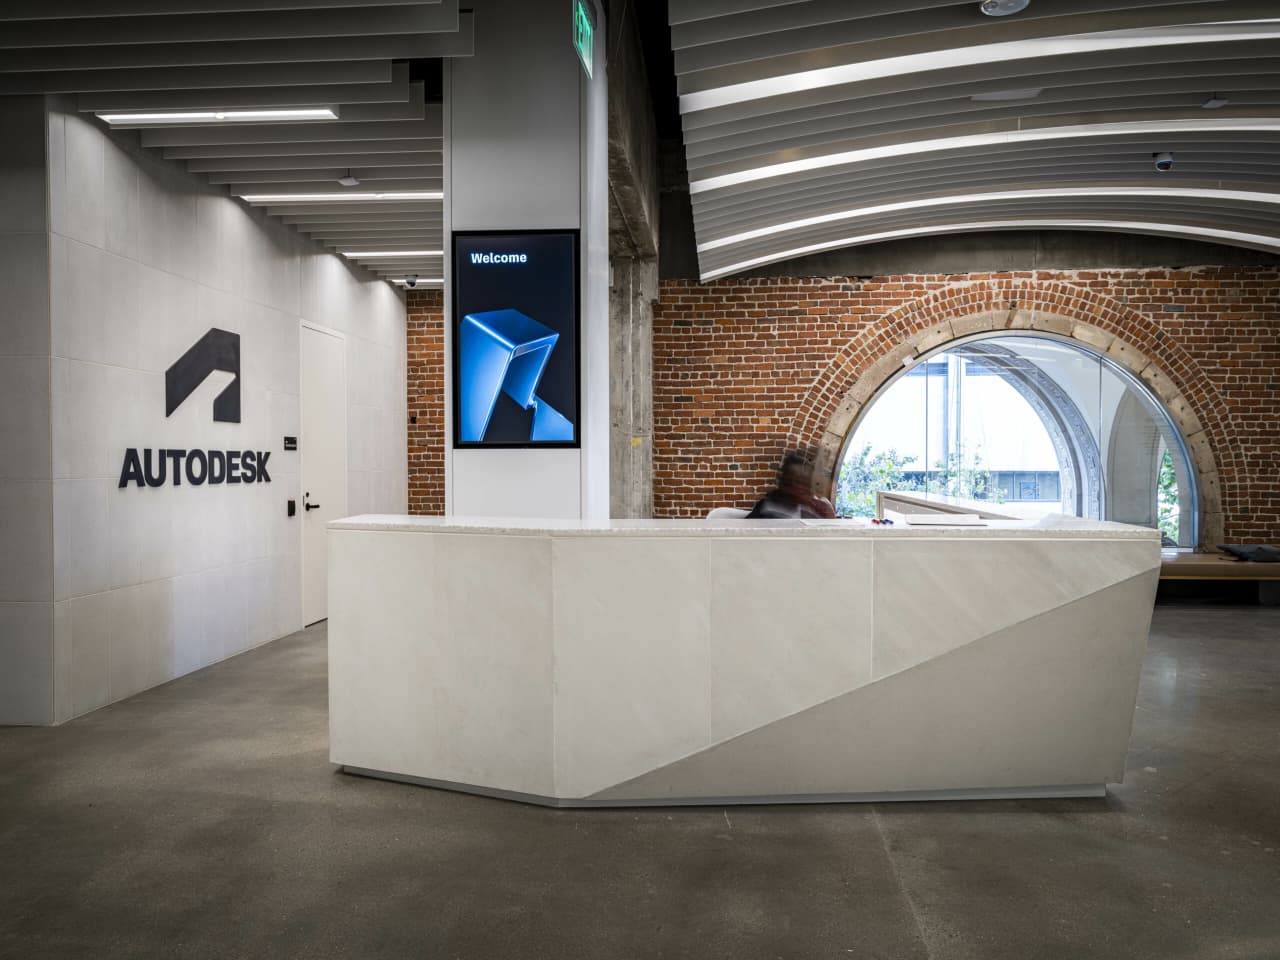 Autodesk’s stock rises on fourth-quarter results, sales outlook